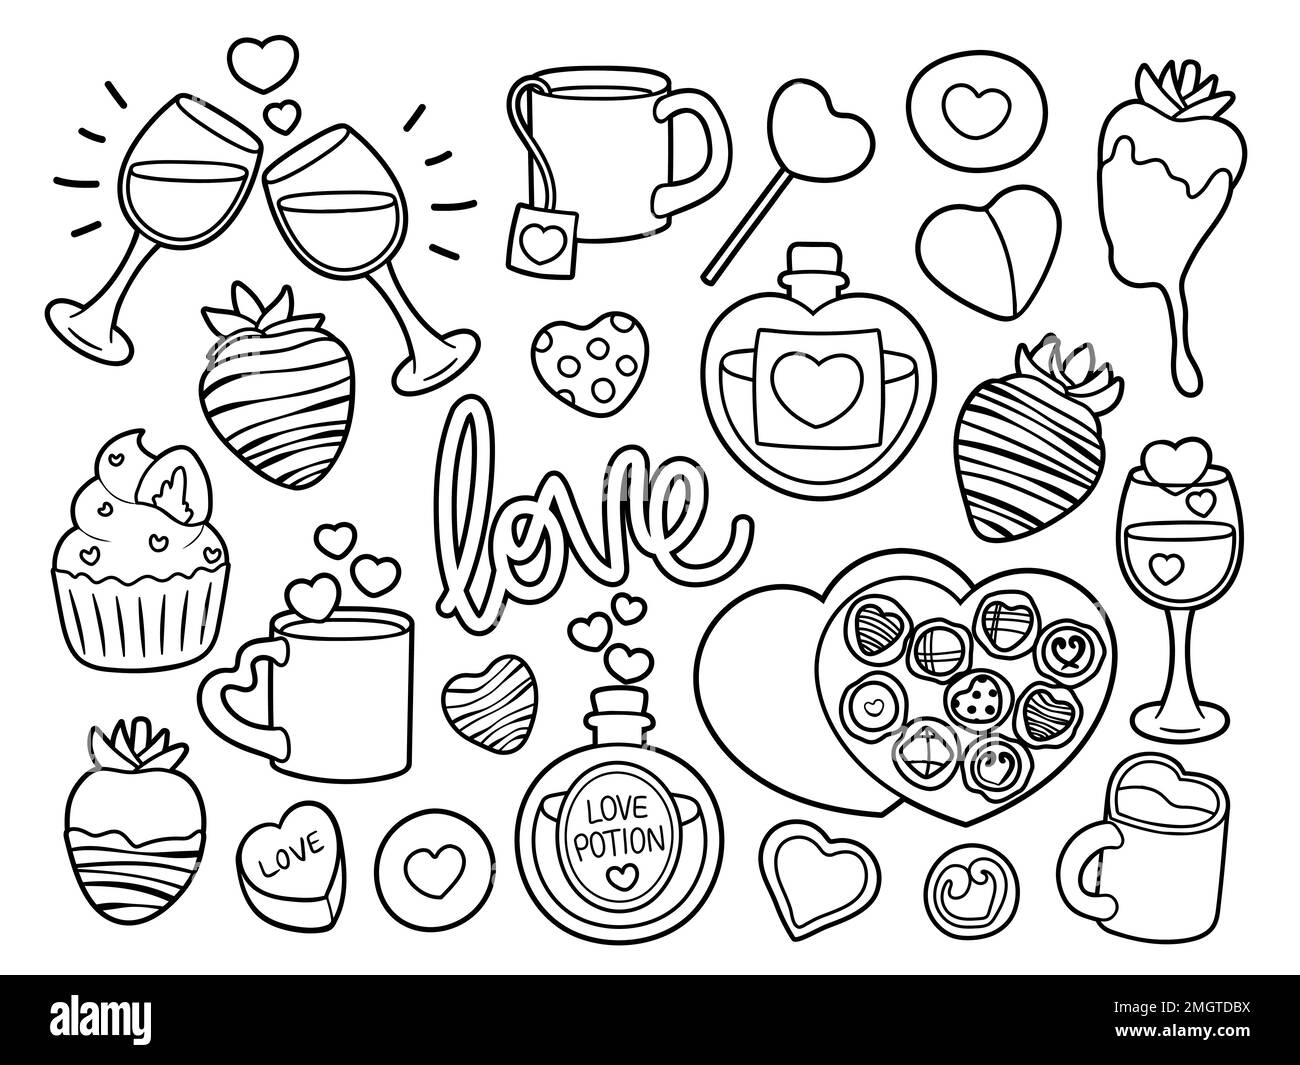 Collection of cute simple Valentine's Day related food, sweets and drinks. Black and white vector illustrations for coloring. Stock Vector